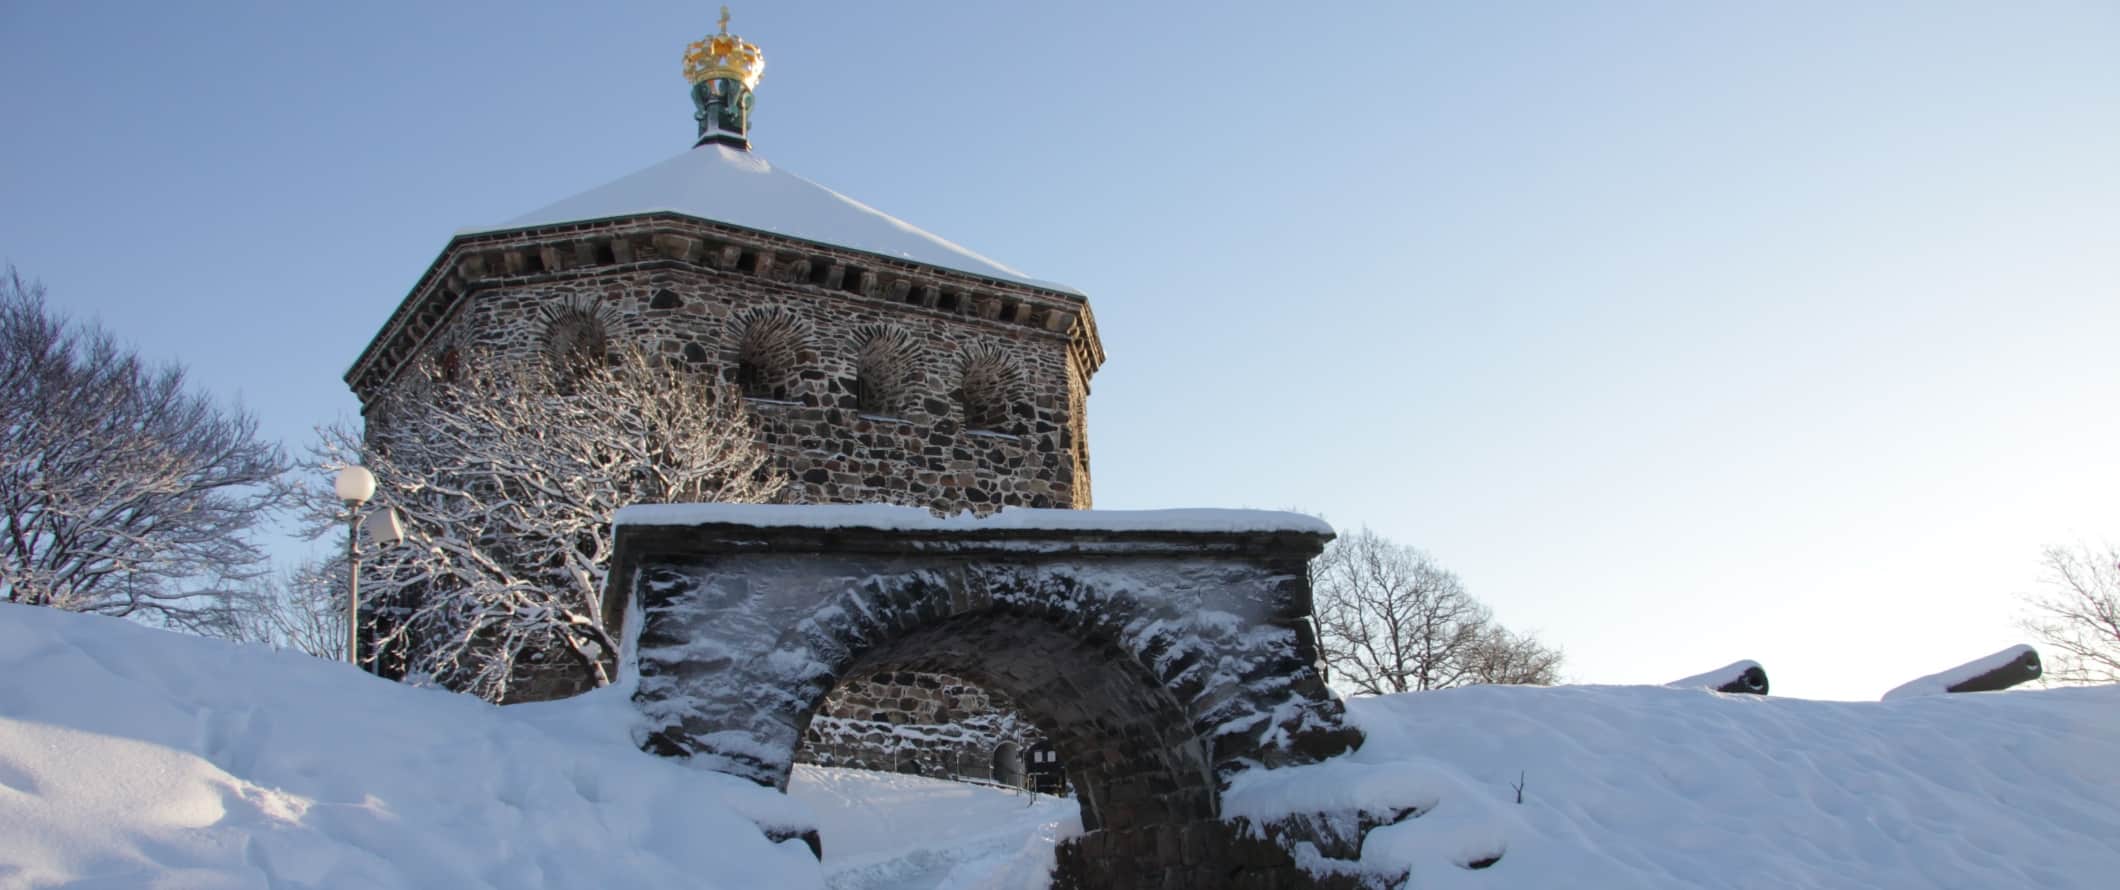 The stone gate at the fortress of Skansen Kronan covered in snow in Gothenburg, Sweden